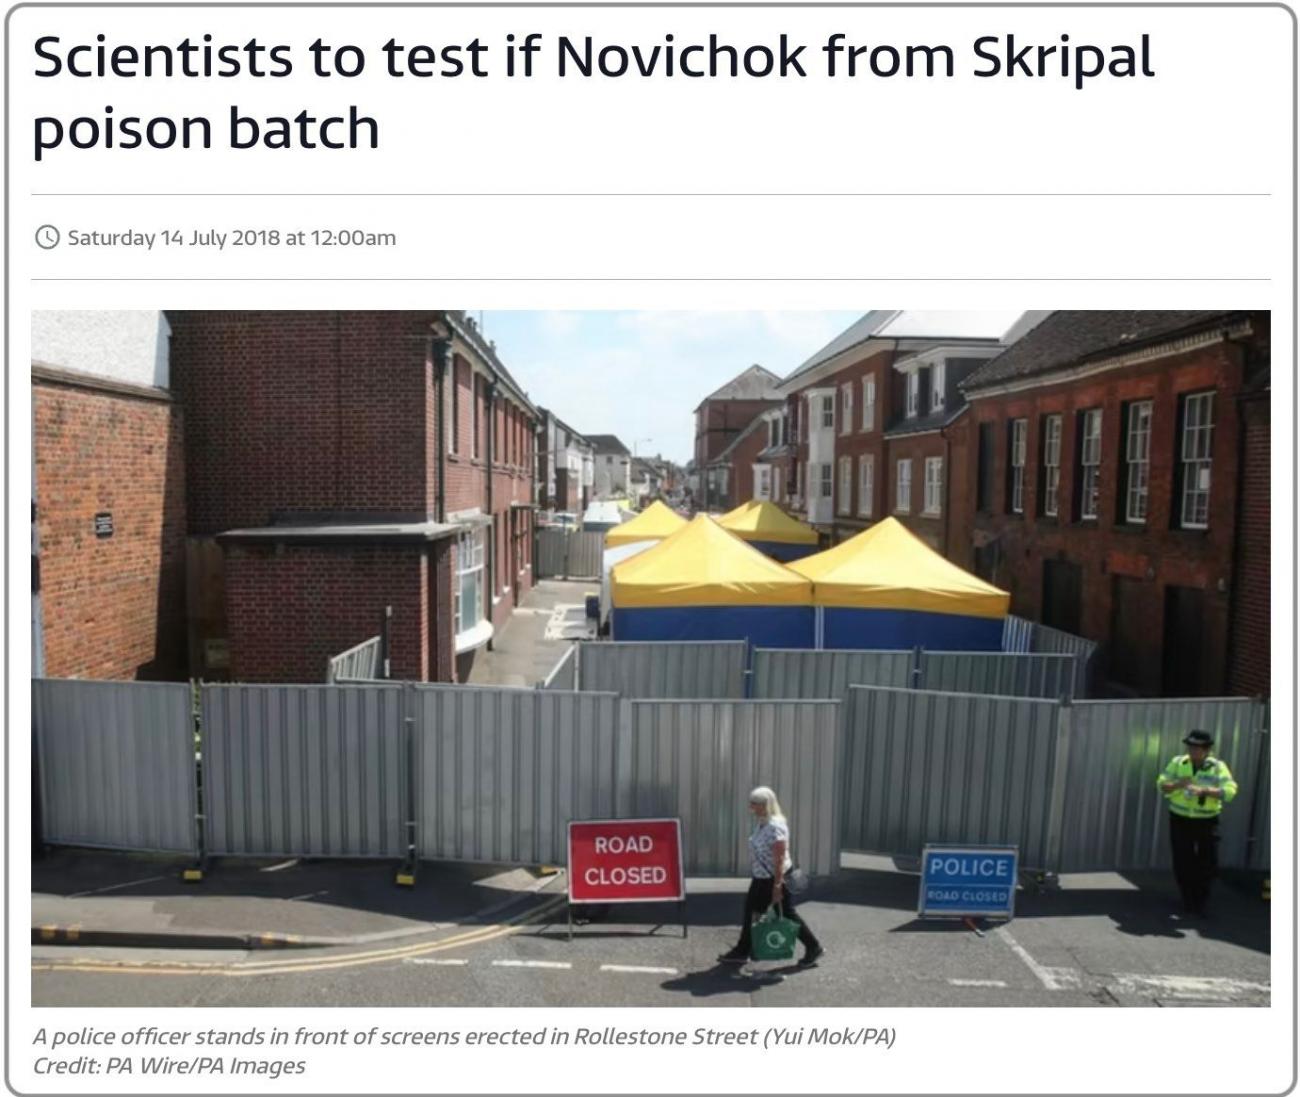 Scientists to test if Novichok from Skripal batch